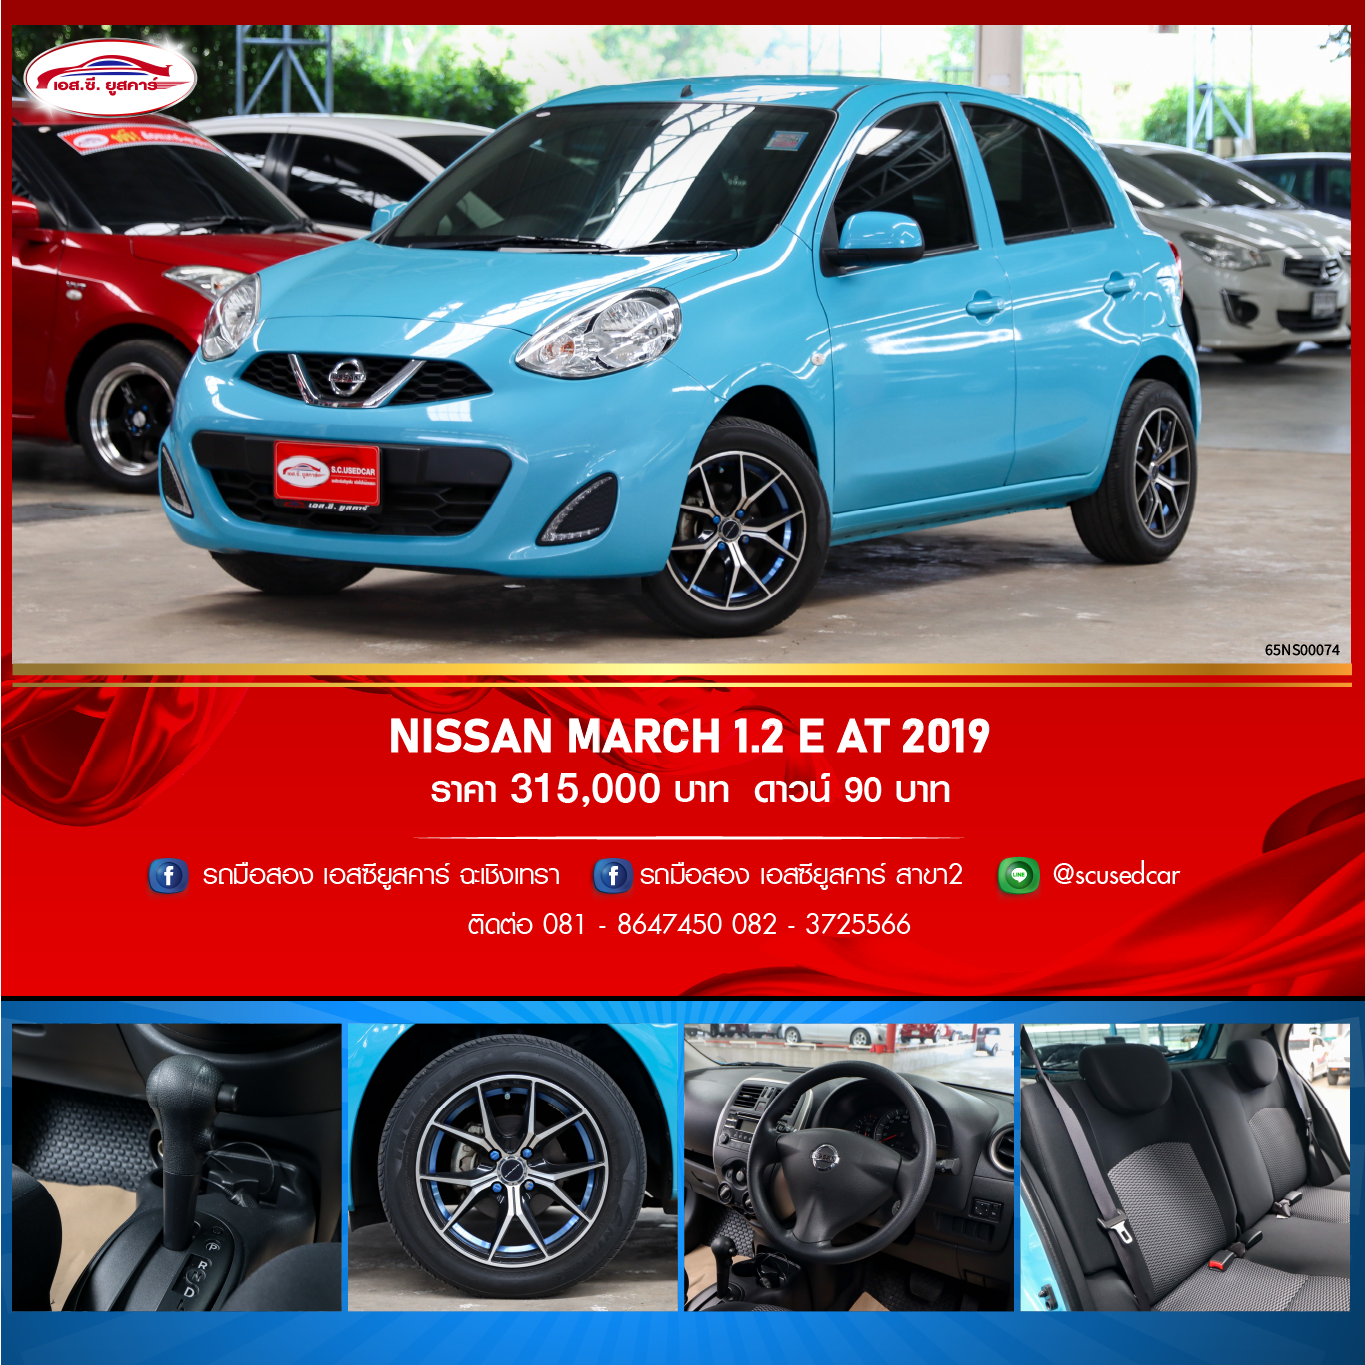 NISSAN MARCH 1.2 E AT 2019